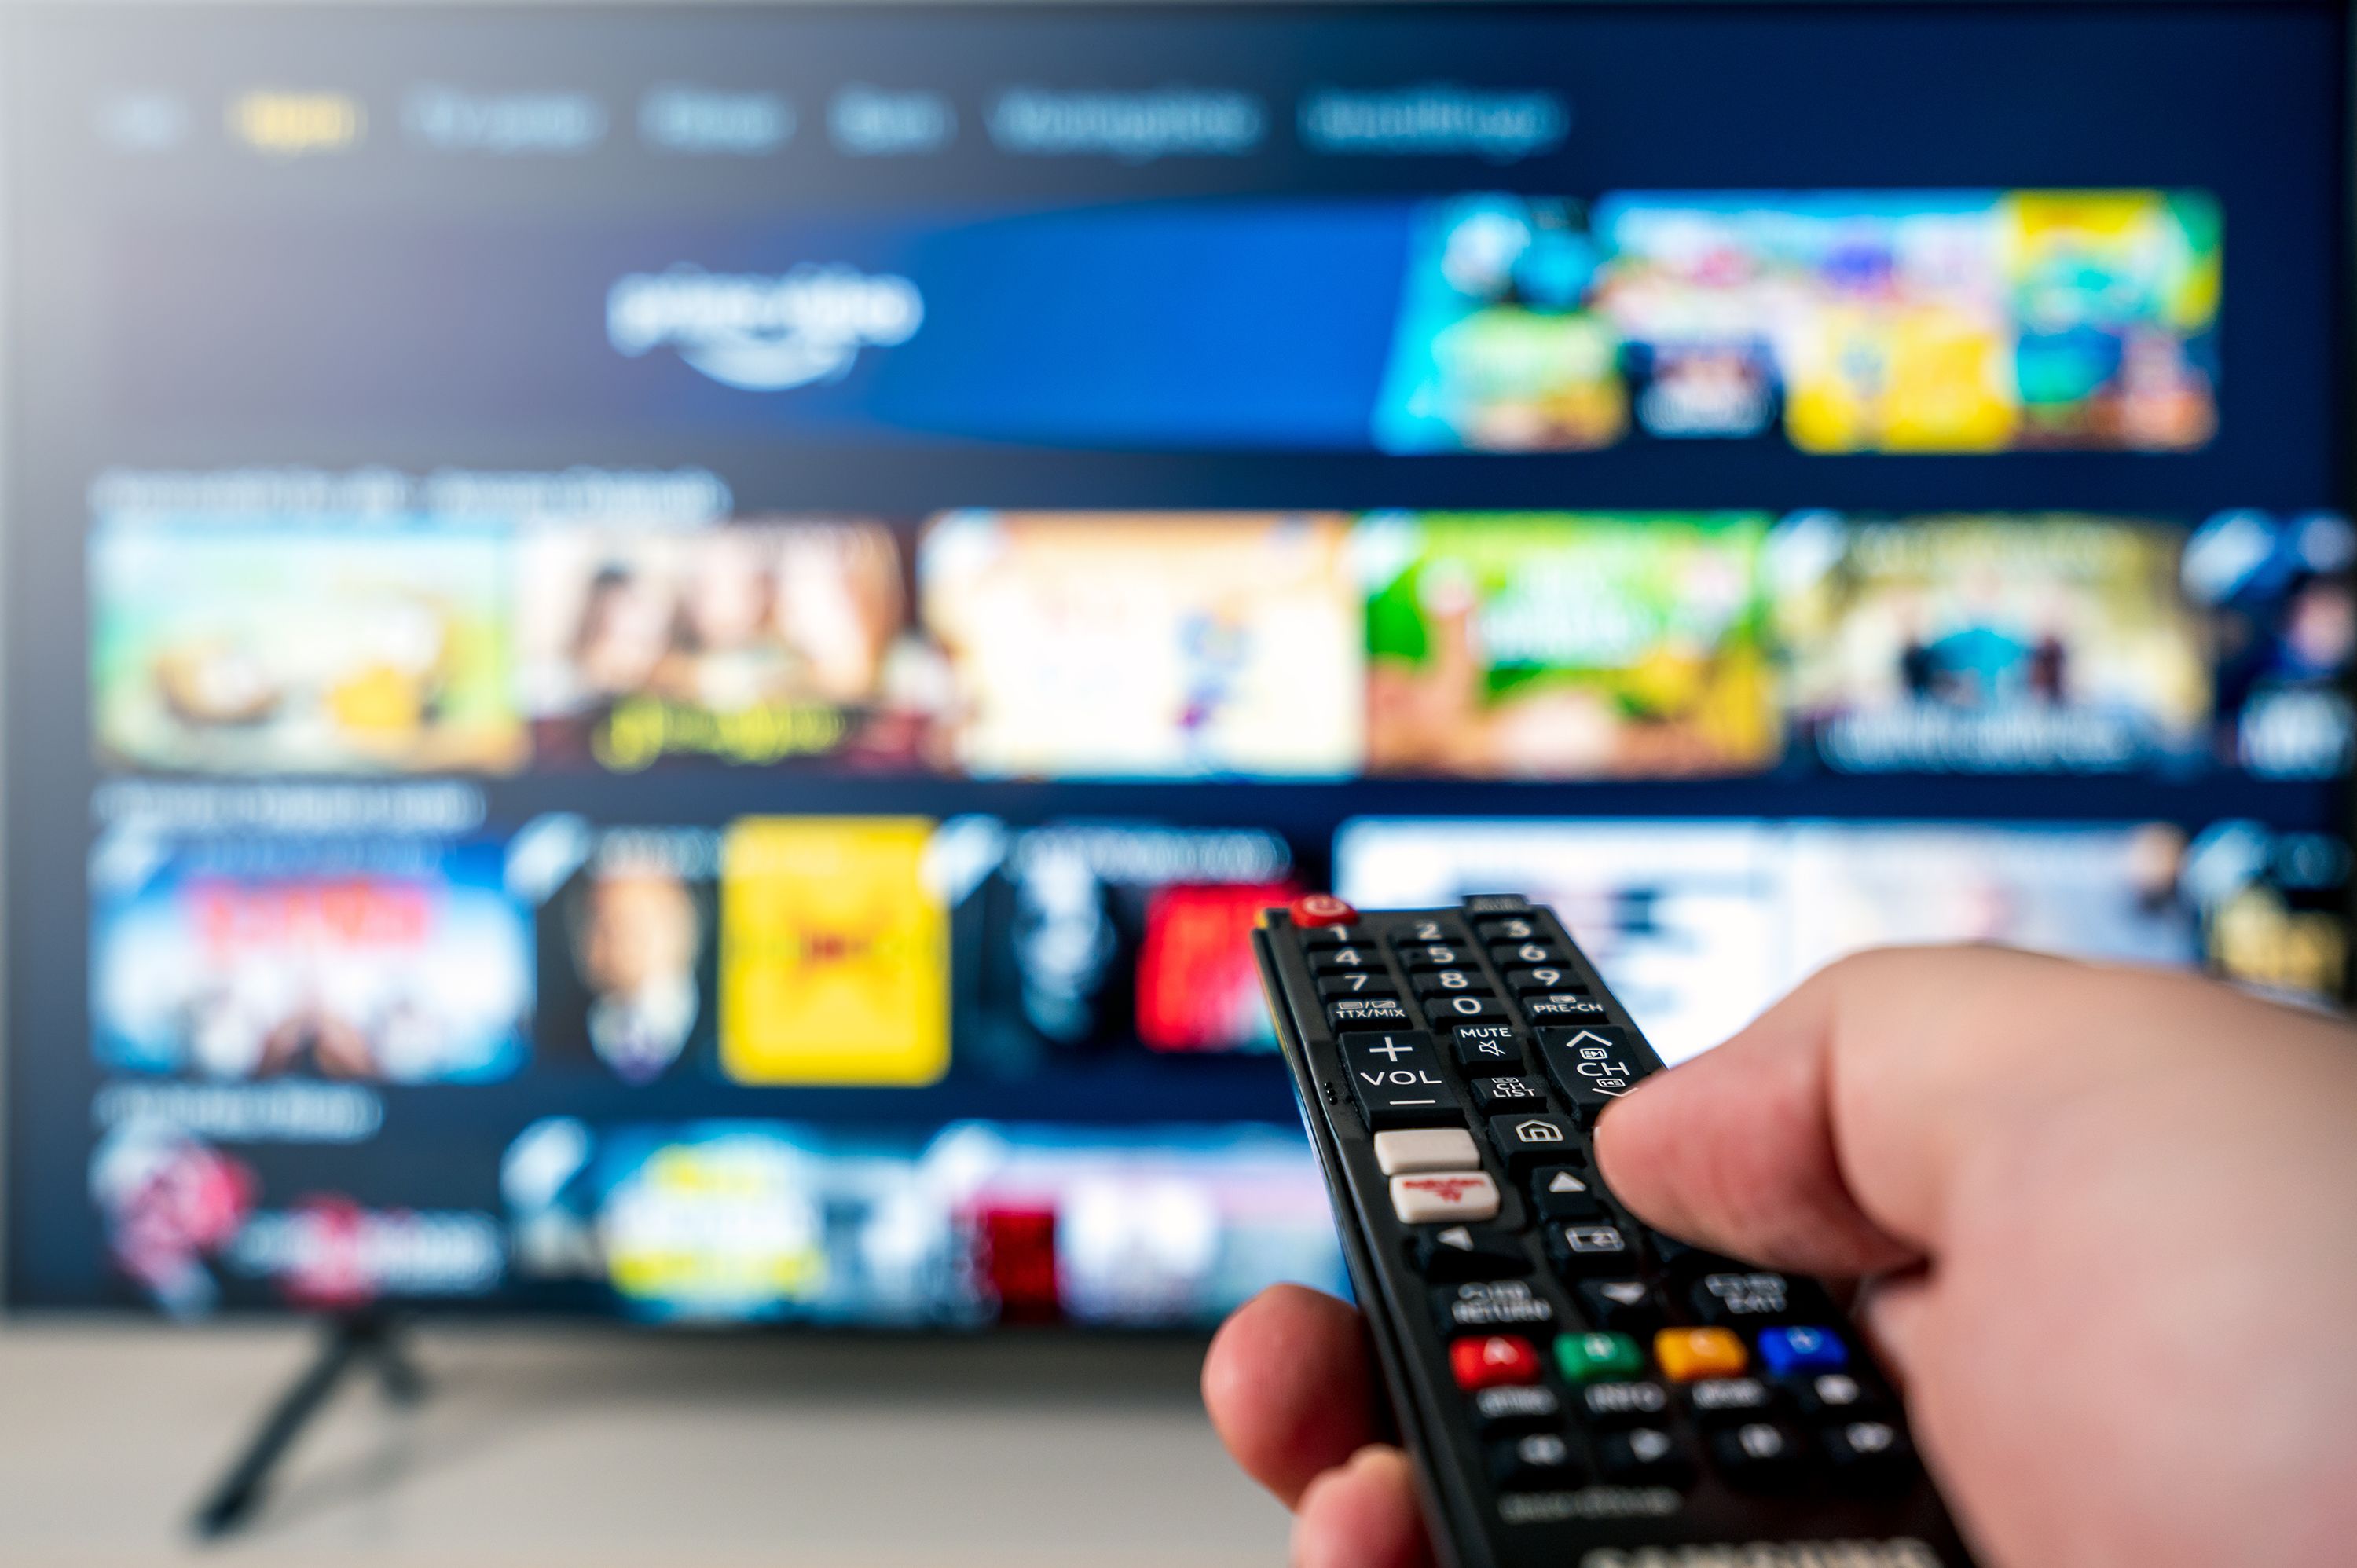 Streaming viewership surpasses cable TV for the first time in the US